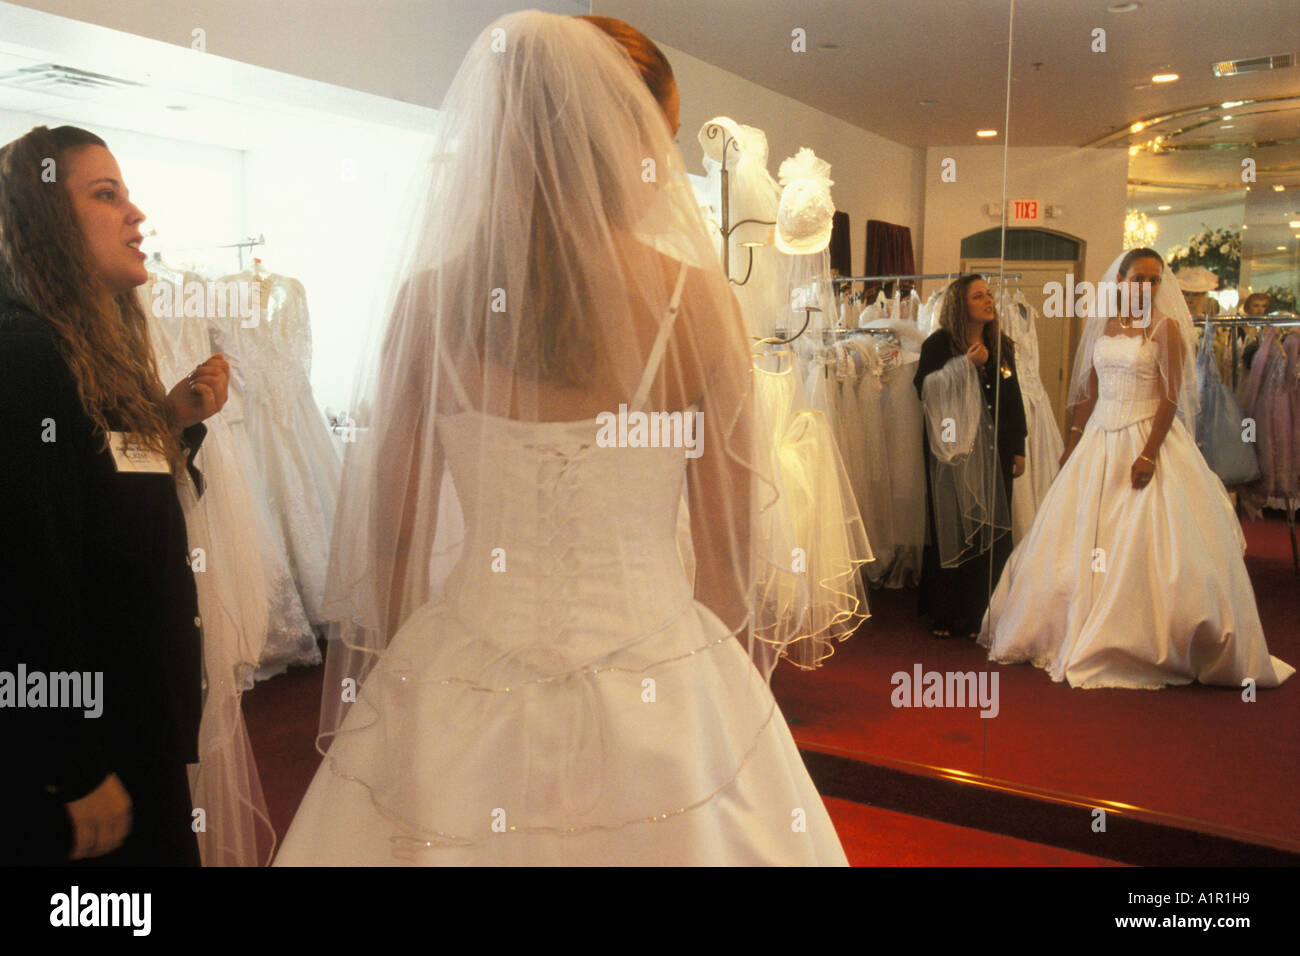 An employee at A Little White Wedding Chapel  in Las Vegas Nevada USA helps a bride select  her wedding gown Stock Photo